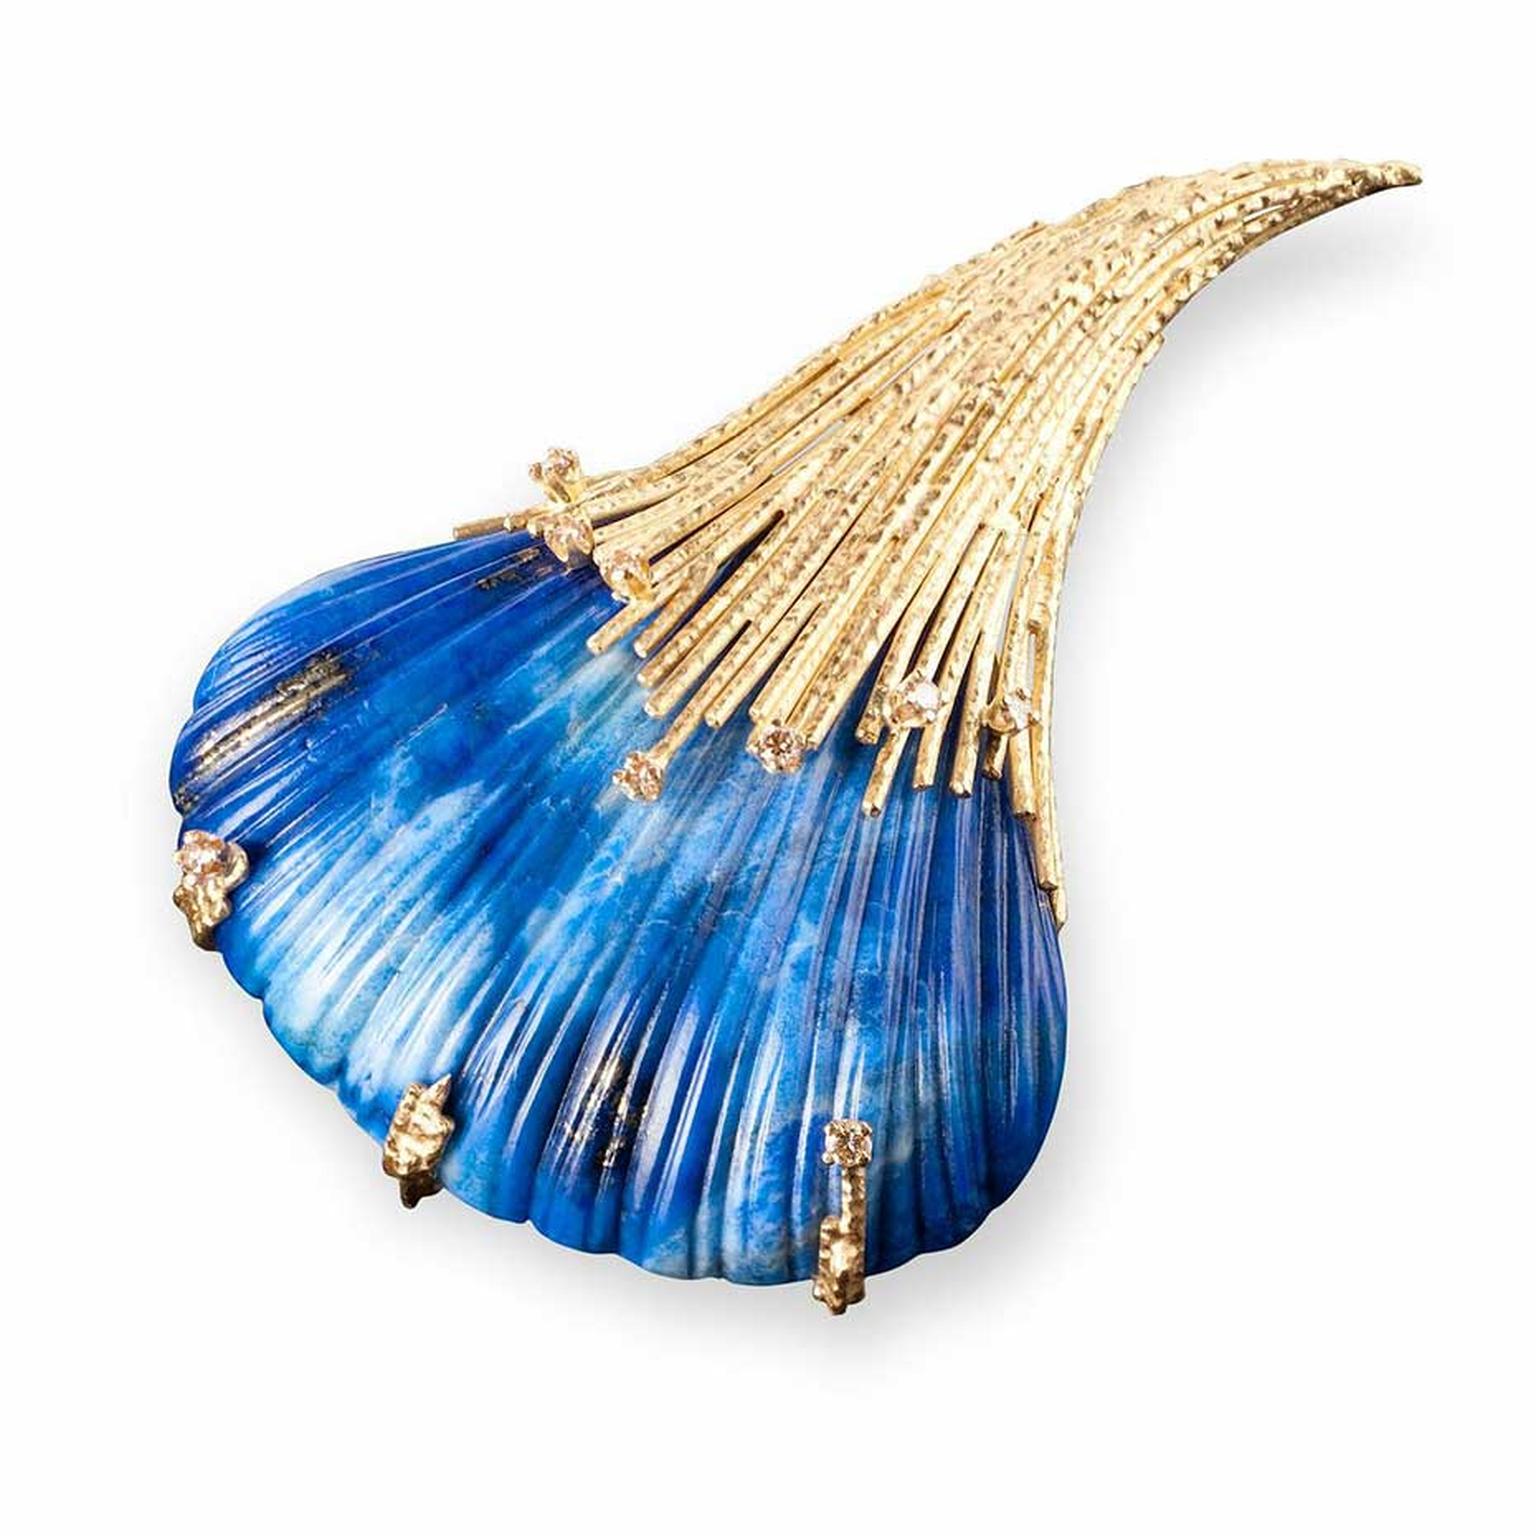 Andrew Grima brooch with yellow gold textured wire, cognac diamonds and lapis lazuli